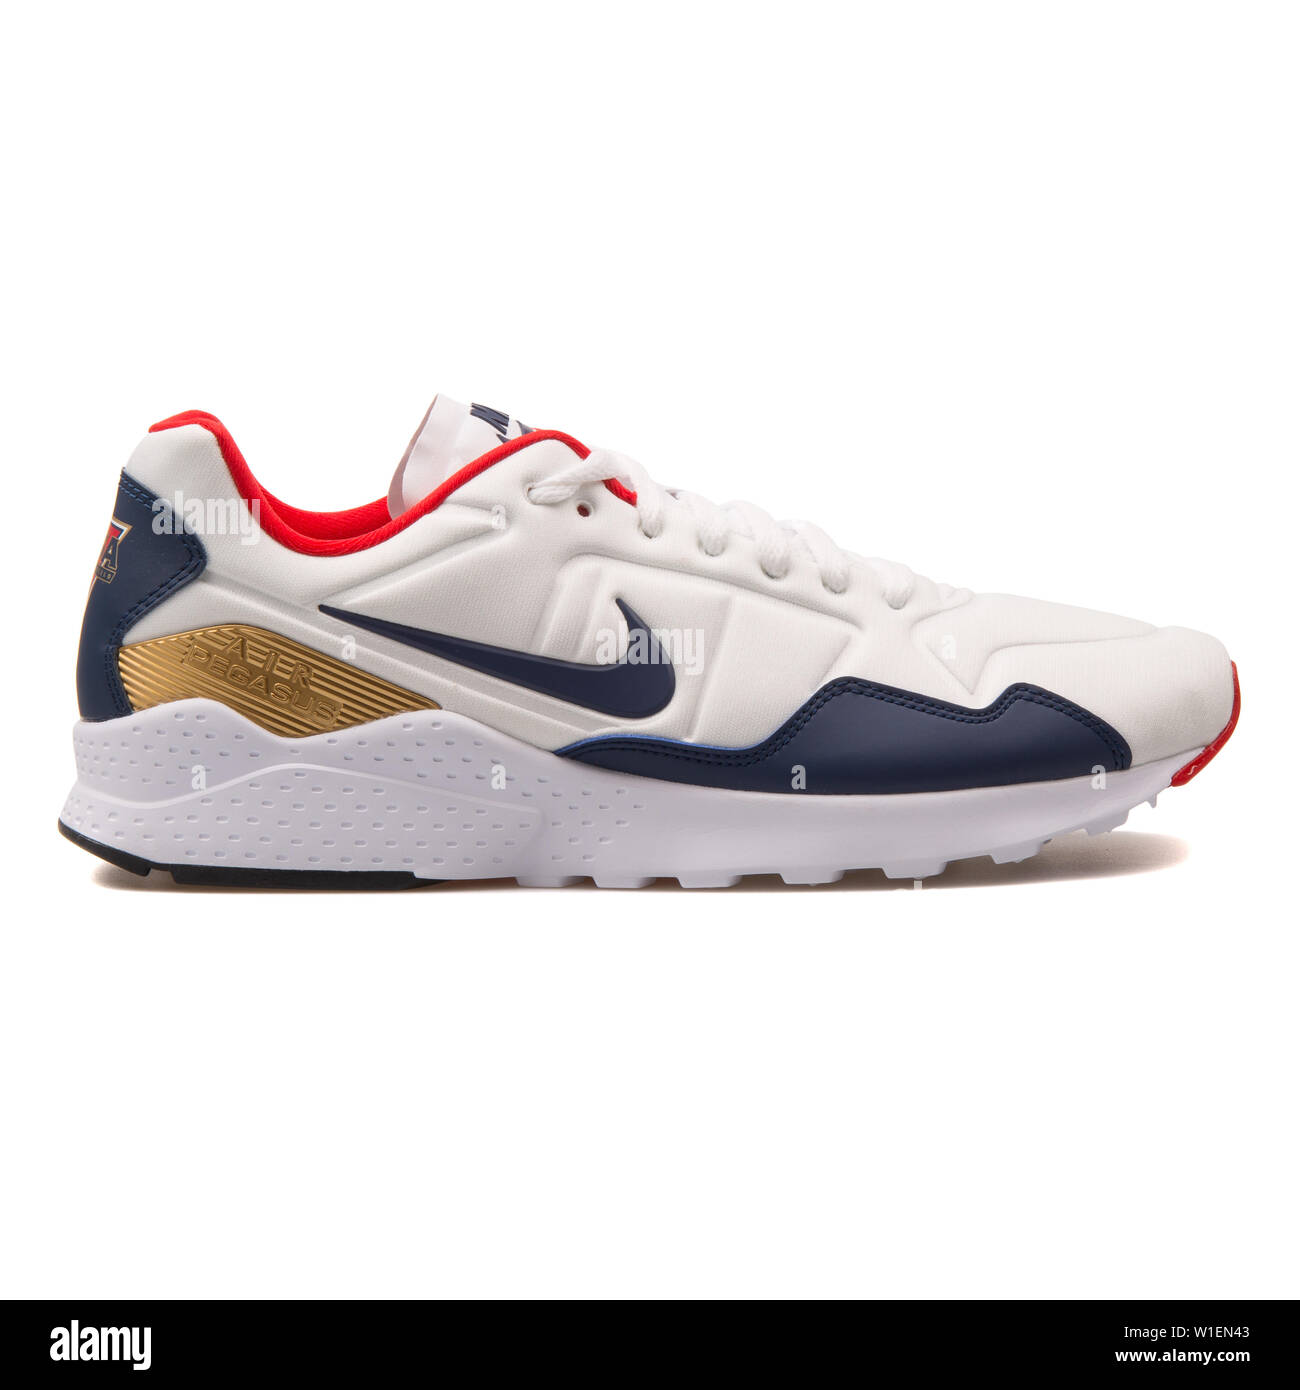 VIENNA, AUSTRIA - AUGUST 30, 2017: Nike Air Zoom Pegasus 92 white, blue,  gold and red sneaker on white background Stock Photo - Alamy